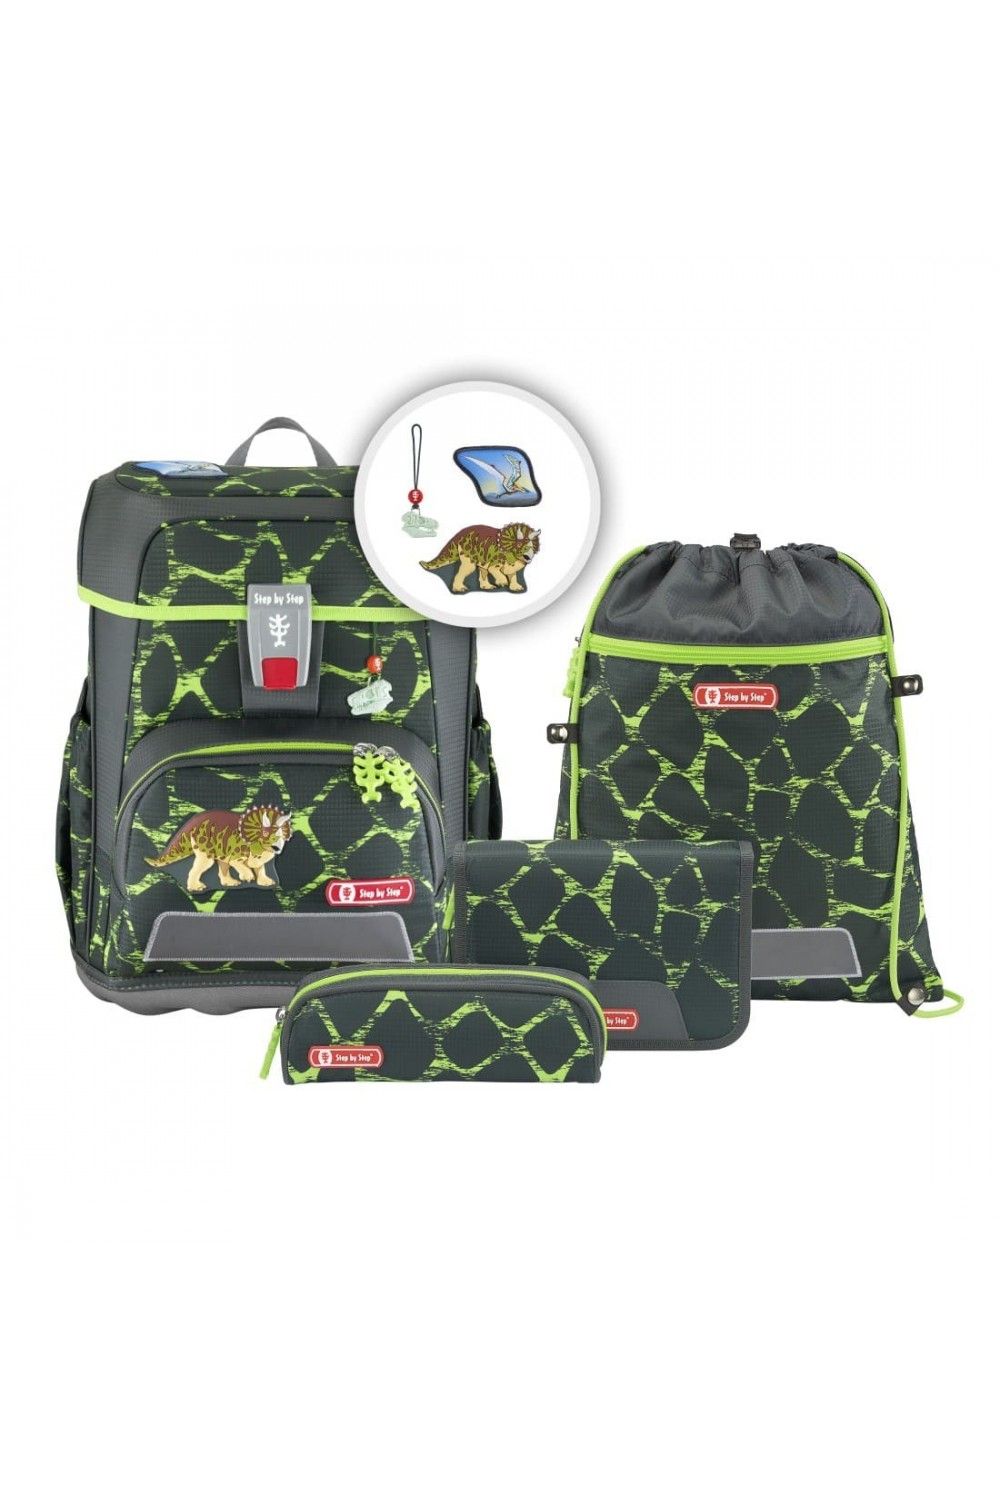 School backpack set Step by Step Cloud 5 pieces Dino Life